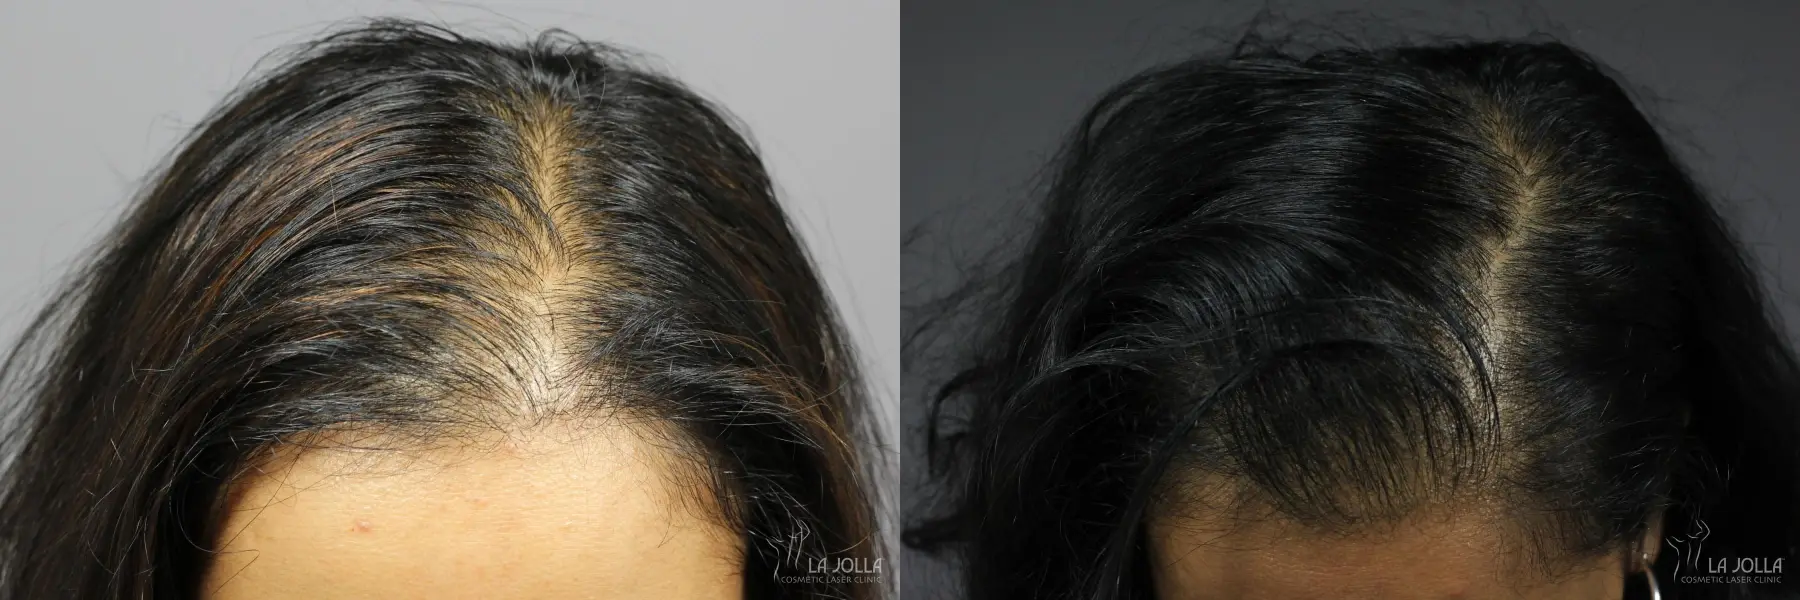 PRP (Platelet-Rich Plasma): Patient 5 - Before and After 1